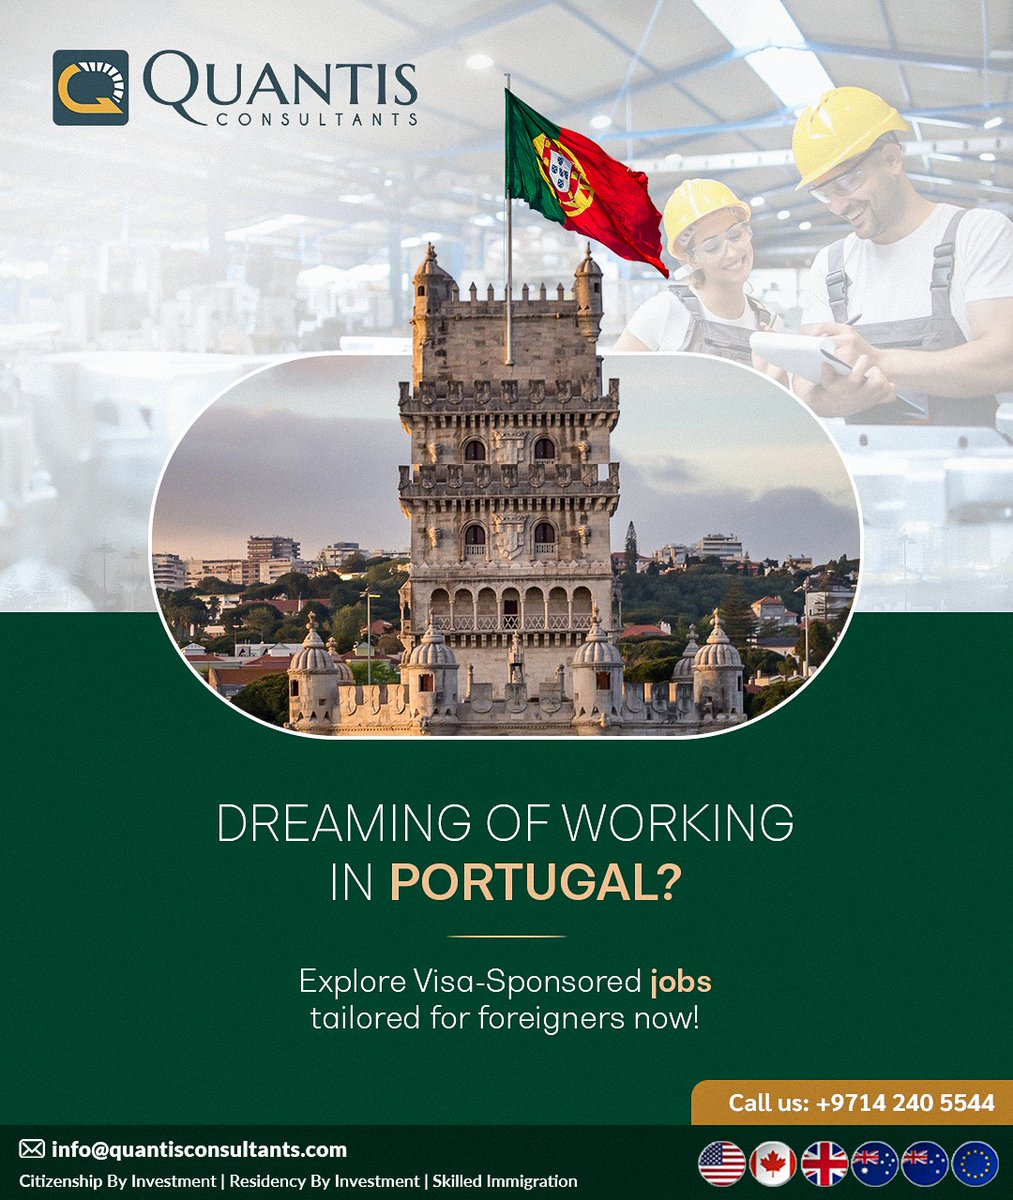 Ready to embrace a career in Portugal? Explore visa-sponsored skilled jobs that match your expertise and ambitions.  

Get in touch with our experts   

Call us at: 📲+971 4 240 5544 

#Quantisconsultants #immigration  #visa #immigrants #migration #SkilledJobs #SponsoredVisa